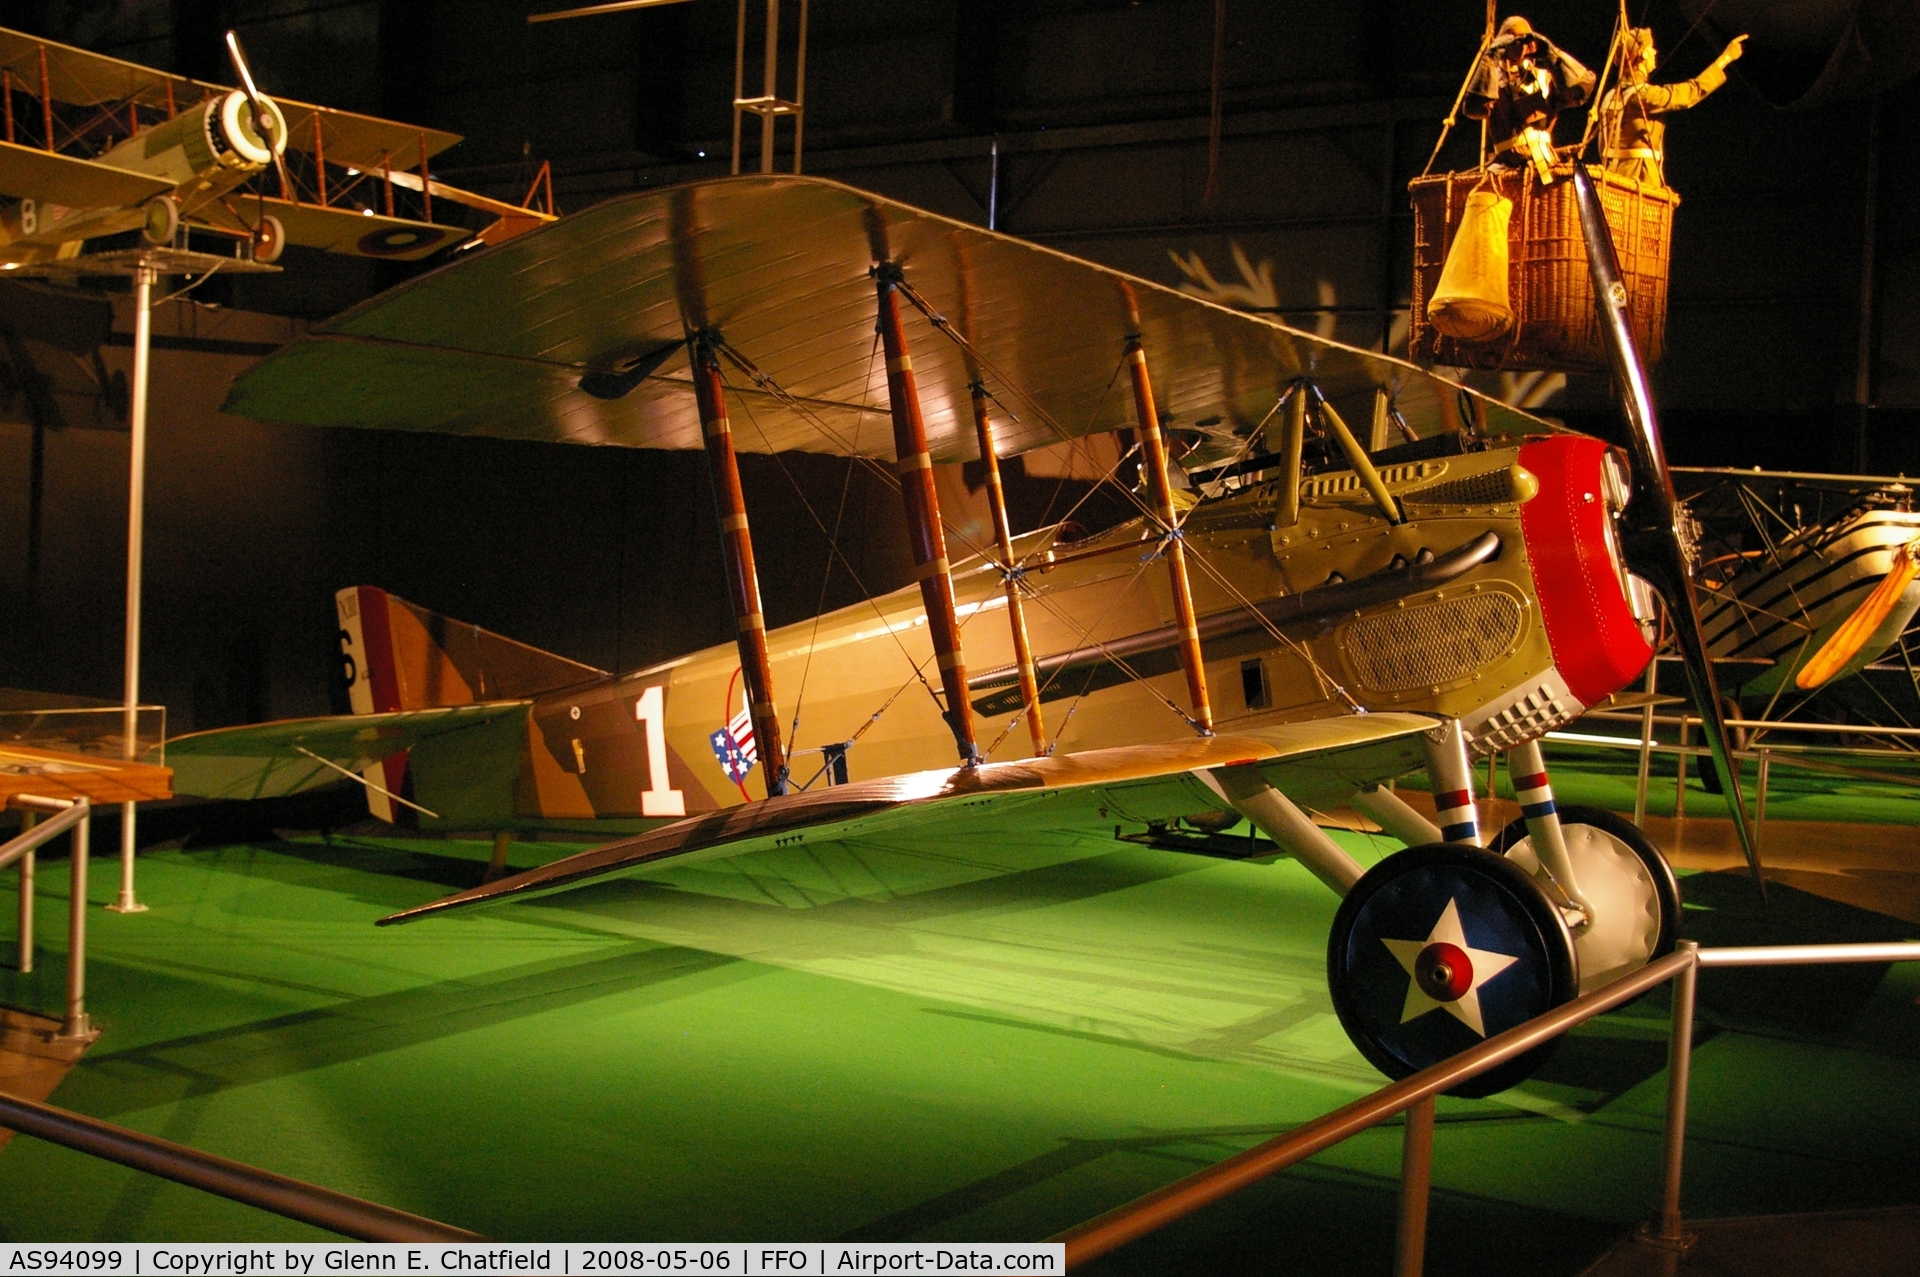 AS94099, SPAD S-VII C/N Not found AS94099, Displayed at the National Museum of the U.S. Air Force